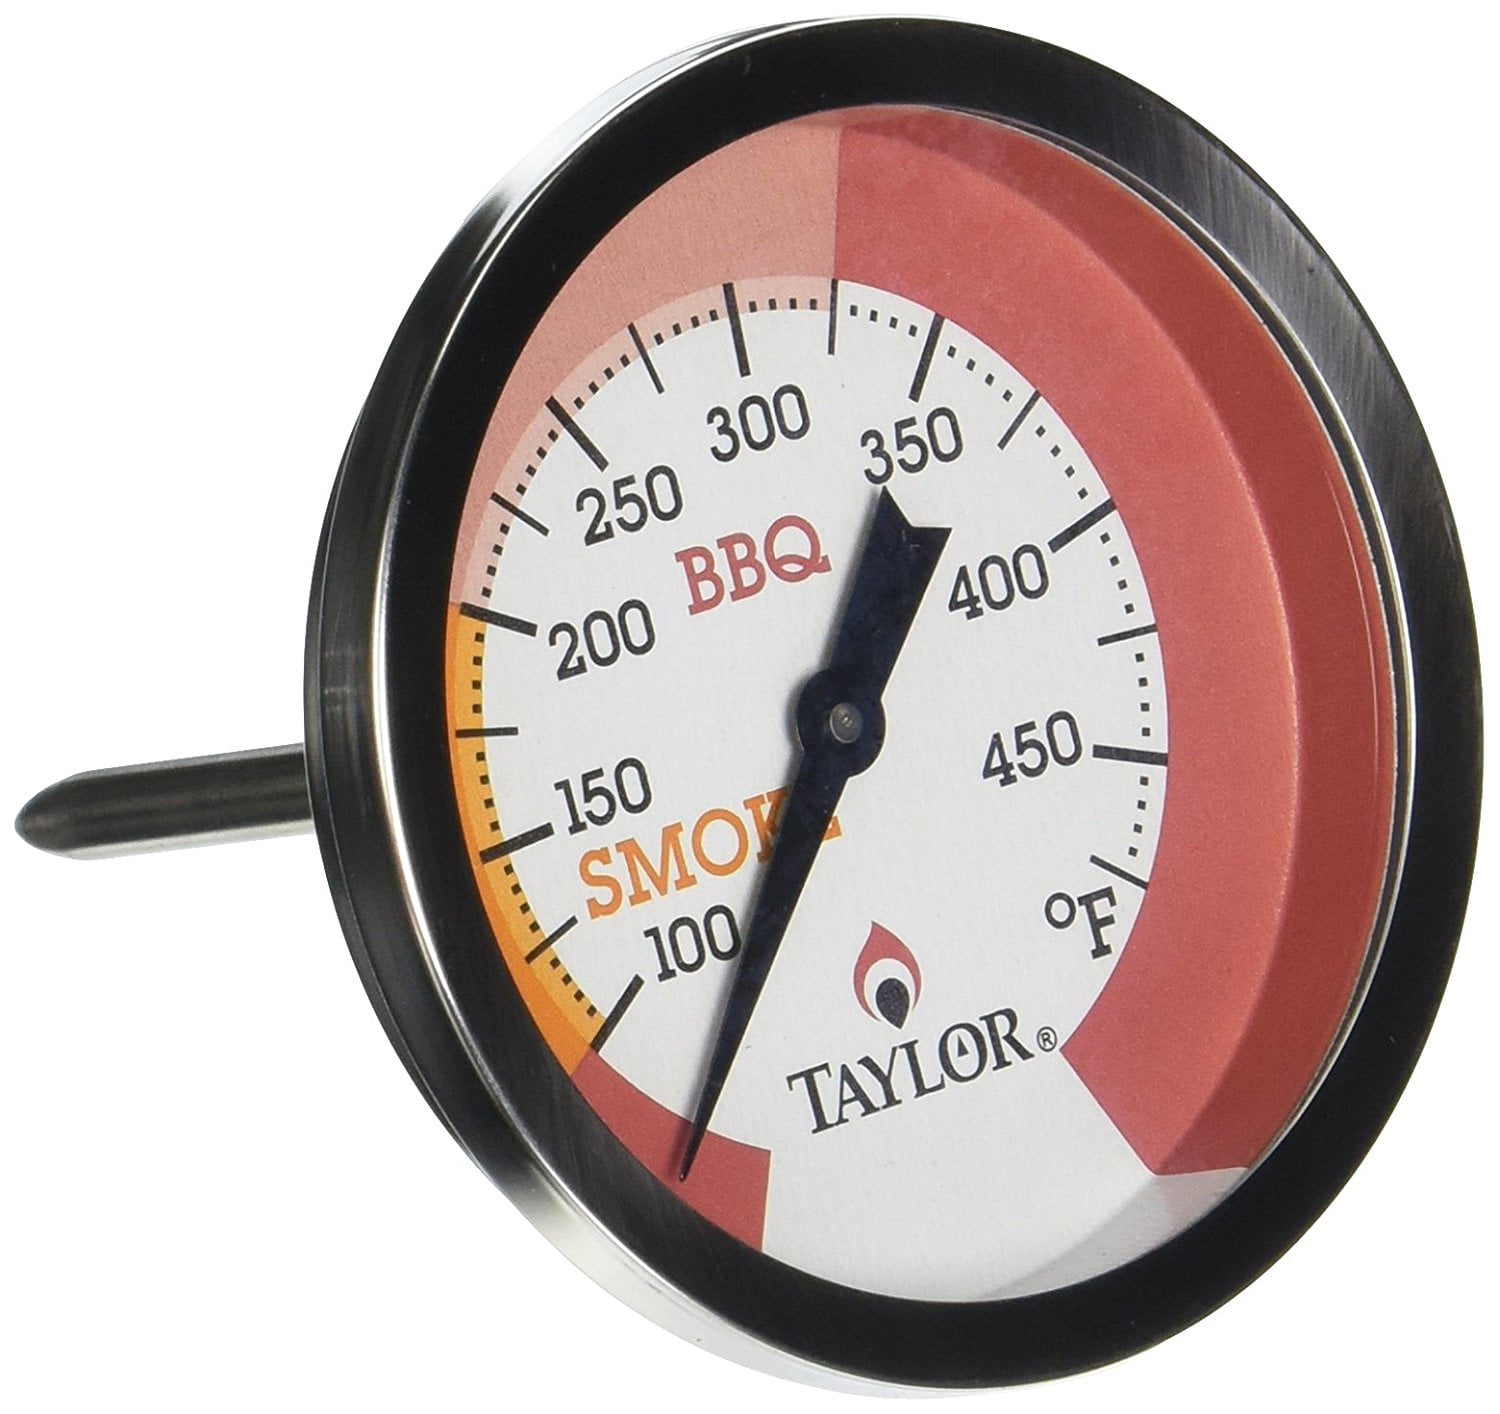 Taylor 6021 Dial Grill Thermometer w/ 100 to 600 Degree Capacity Grill & Oven Thermometer